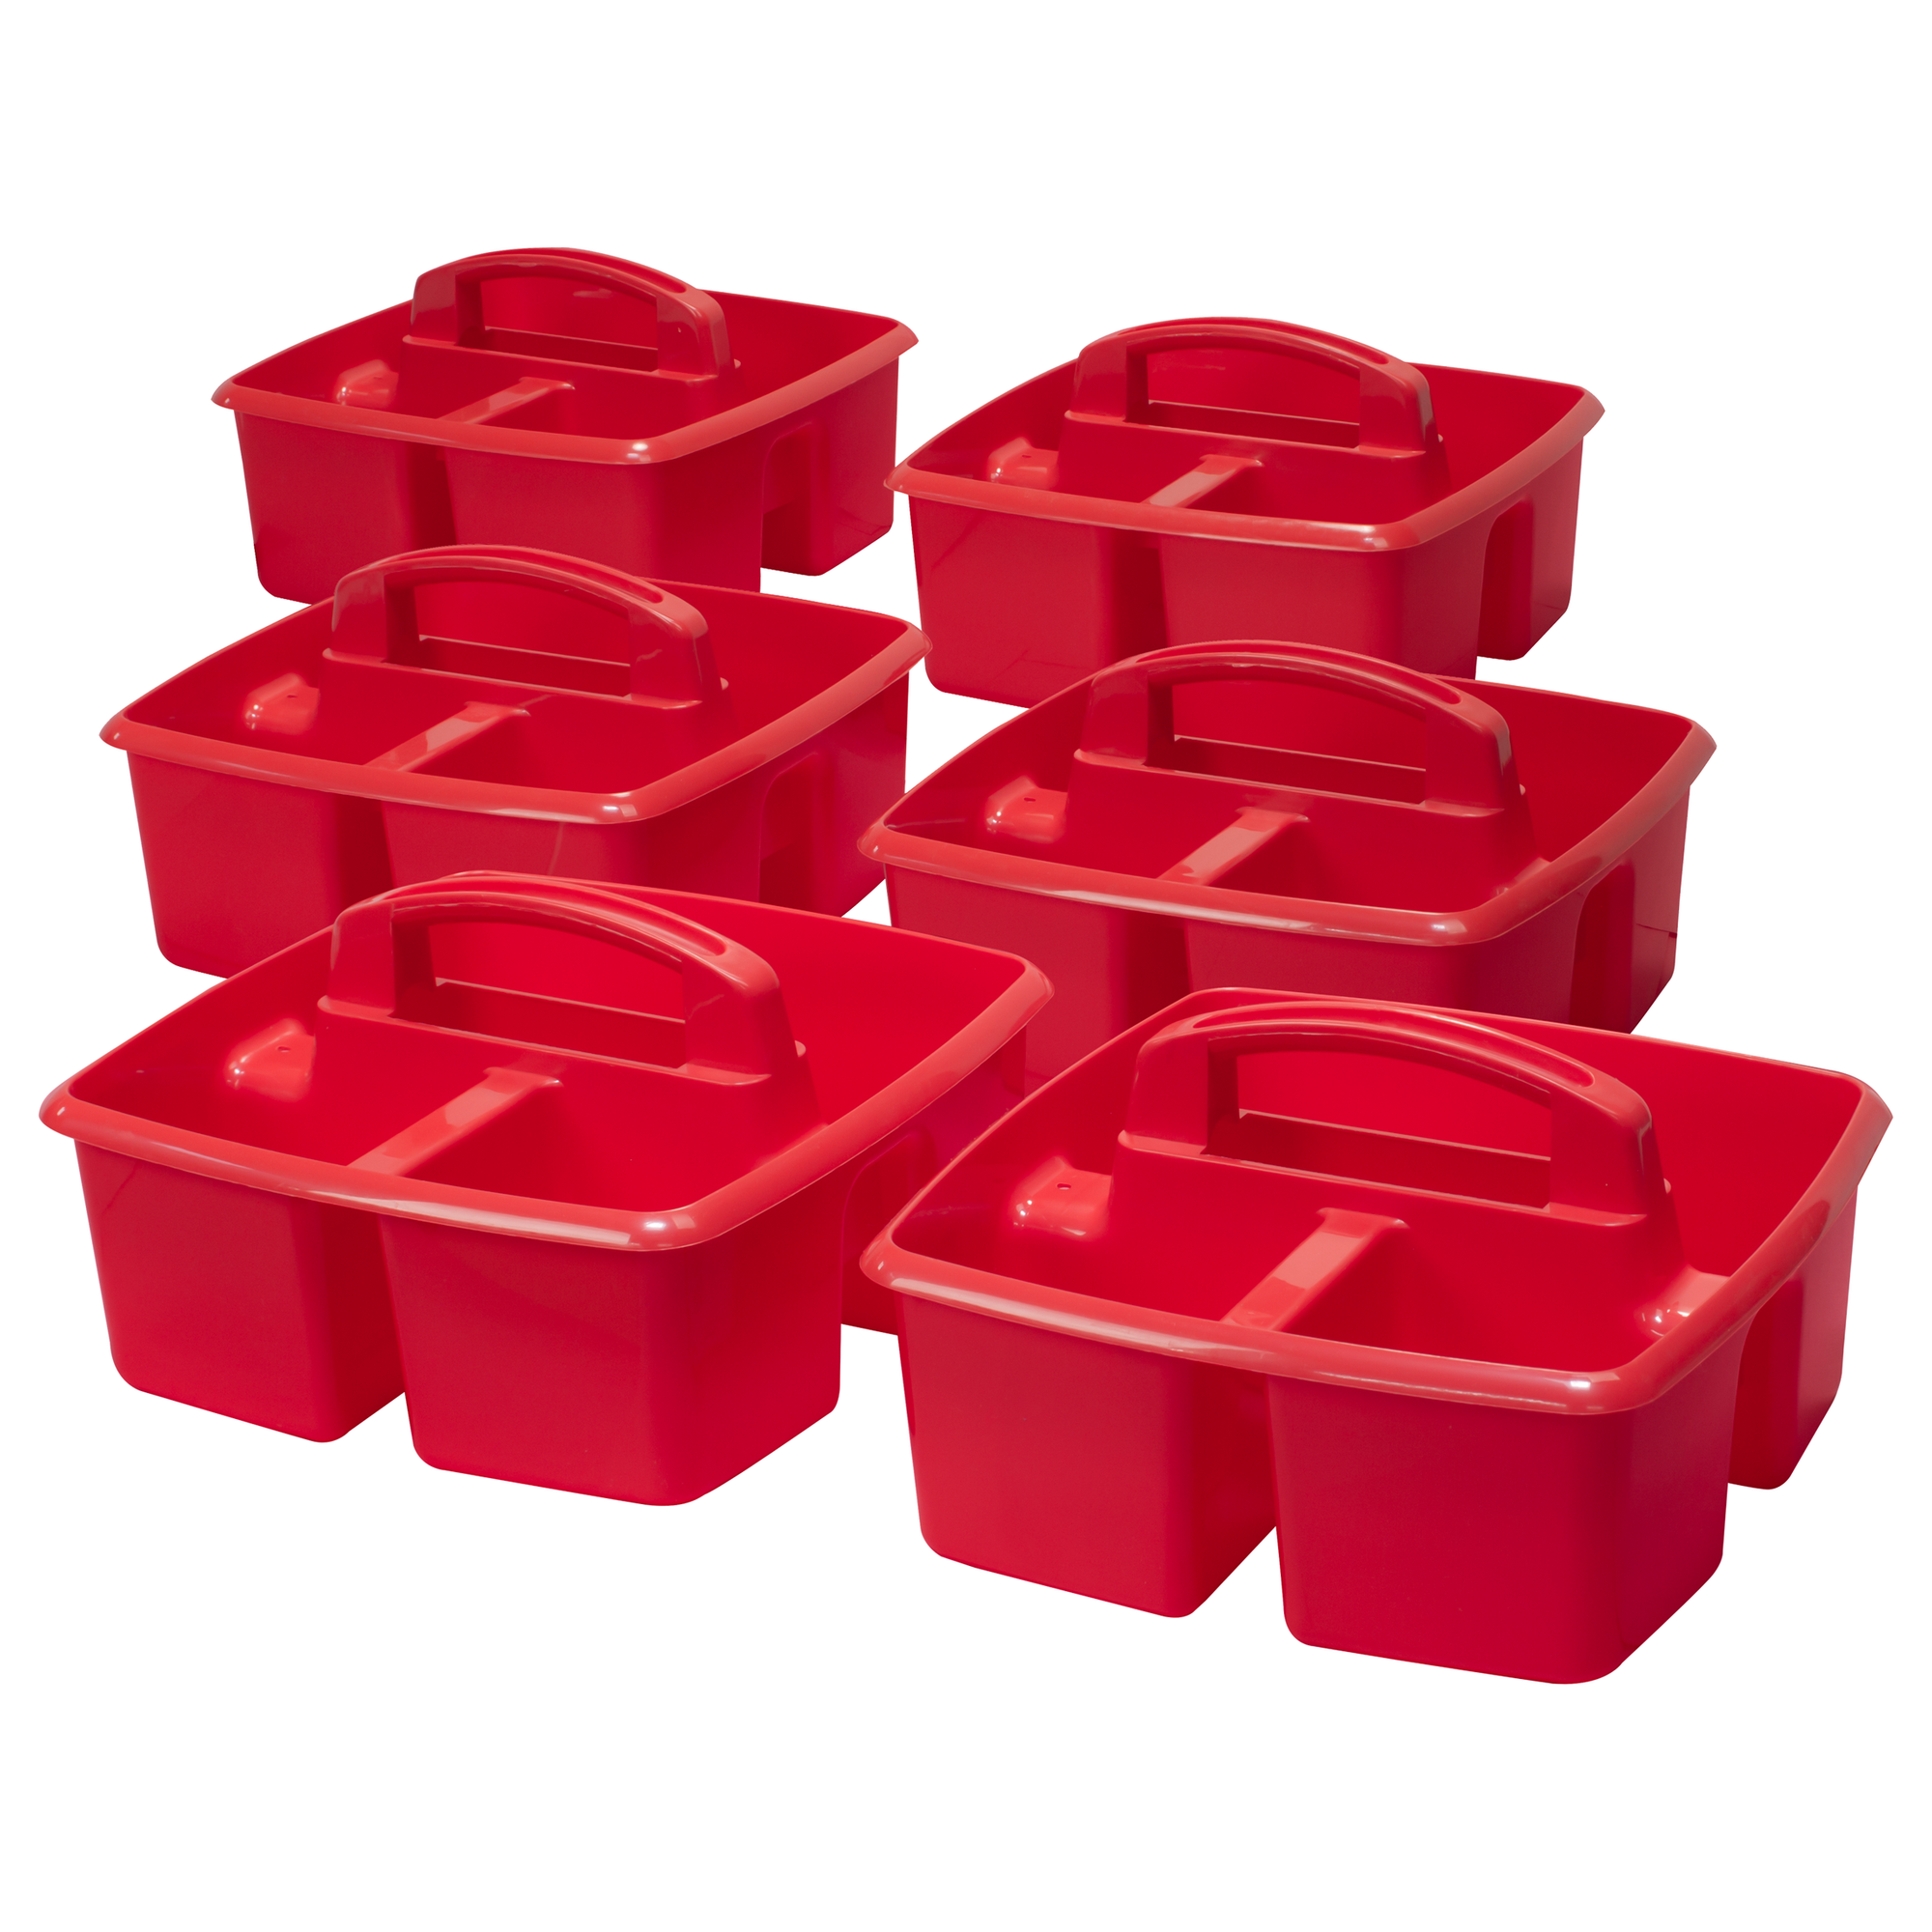 Small Caddy, Red (6 units/pack)